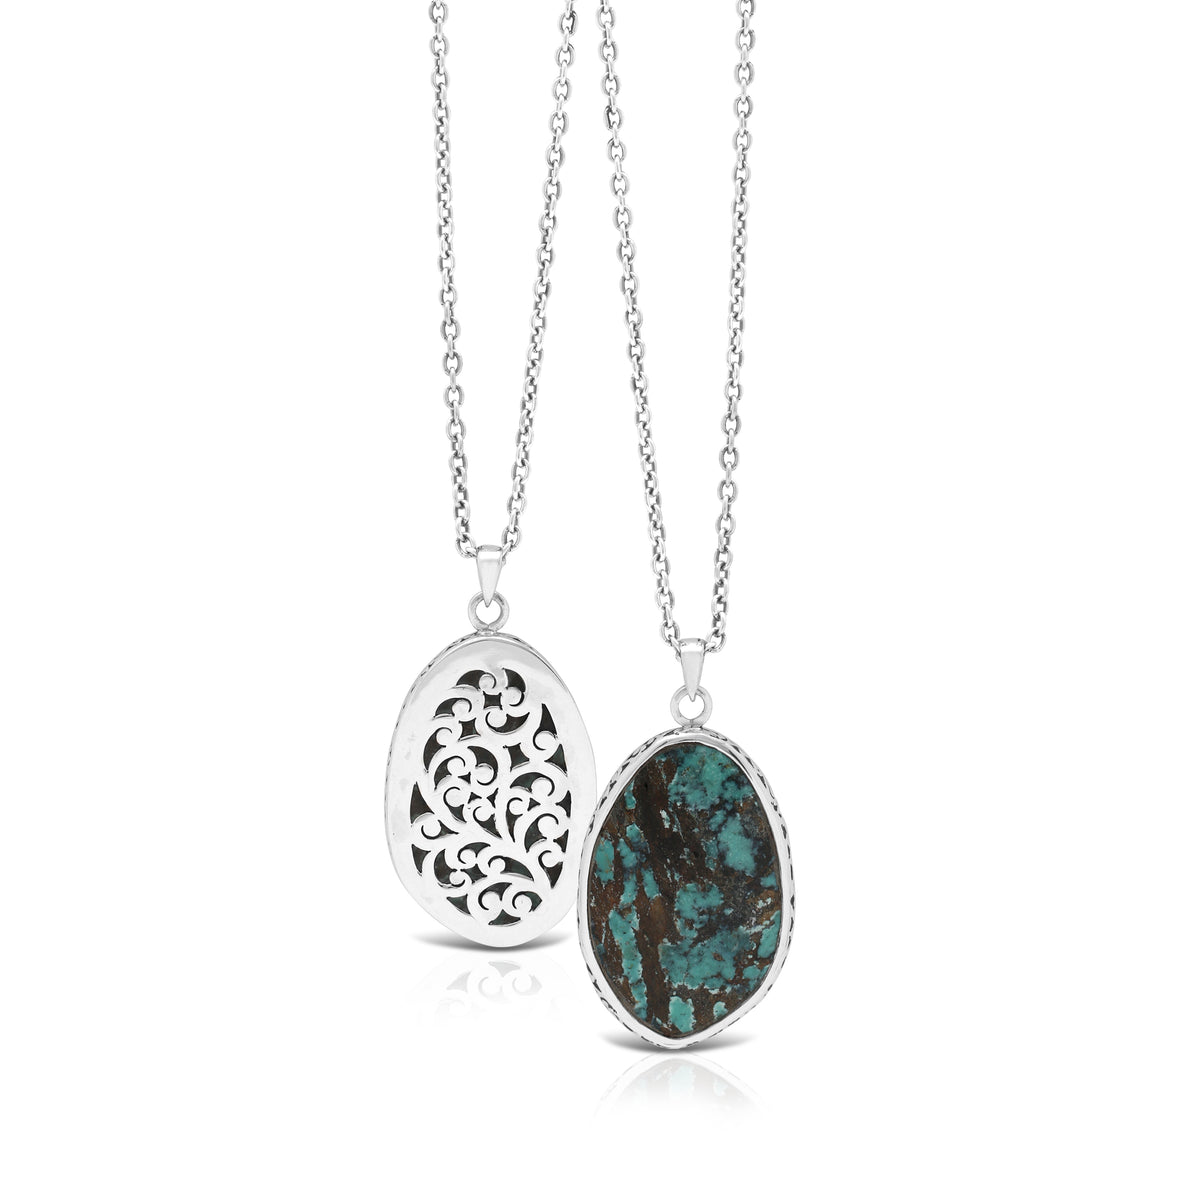 Organic Shaped Turquoise with Hand Carved LH Scroll Rim & Back on Handmade Sterling 16" Silver Chain. Pendant by 23mm x 35mm